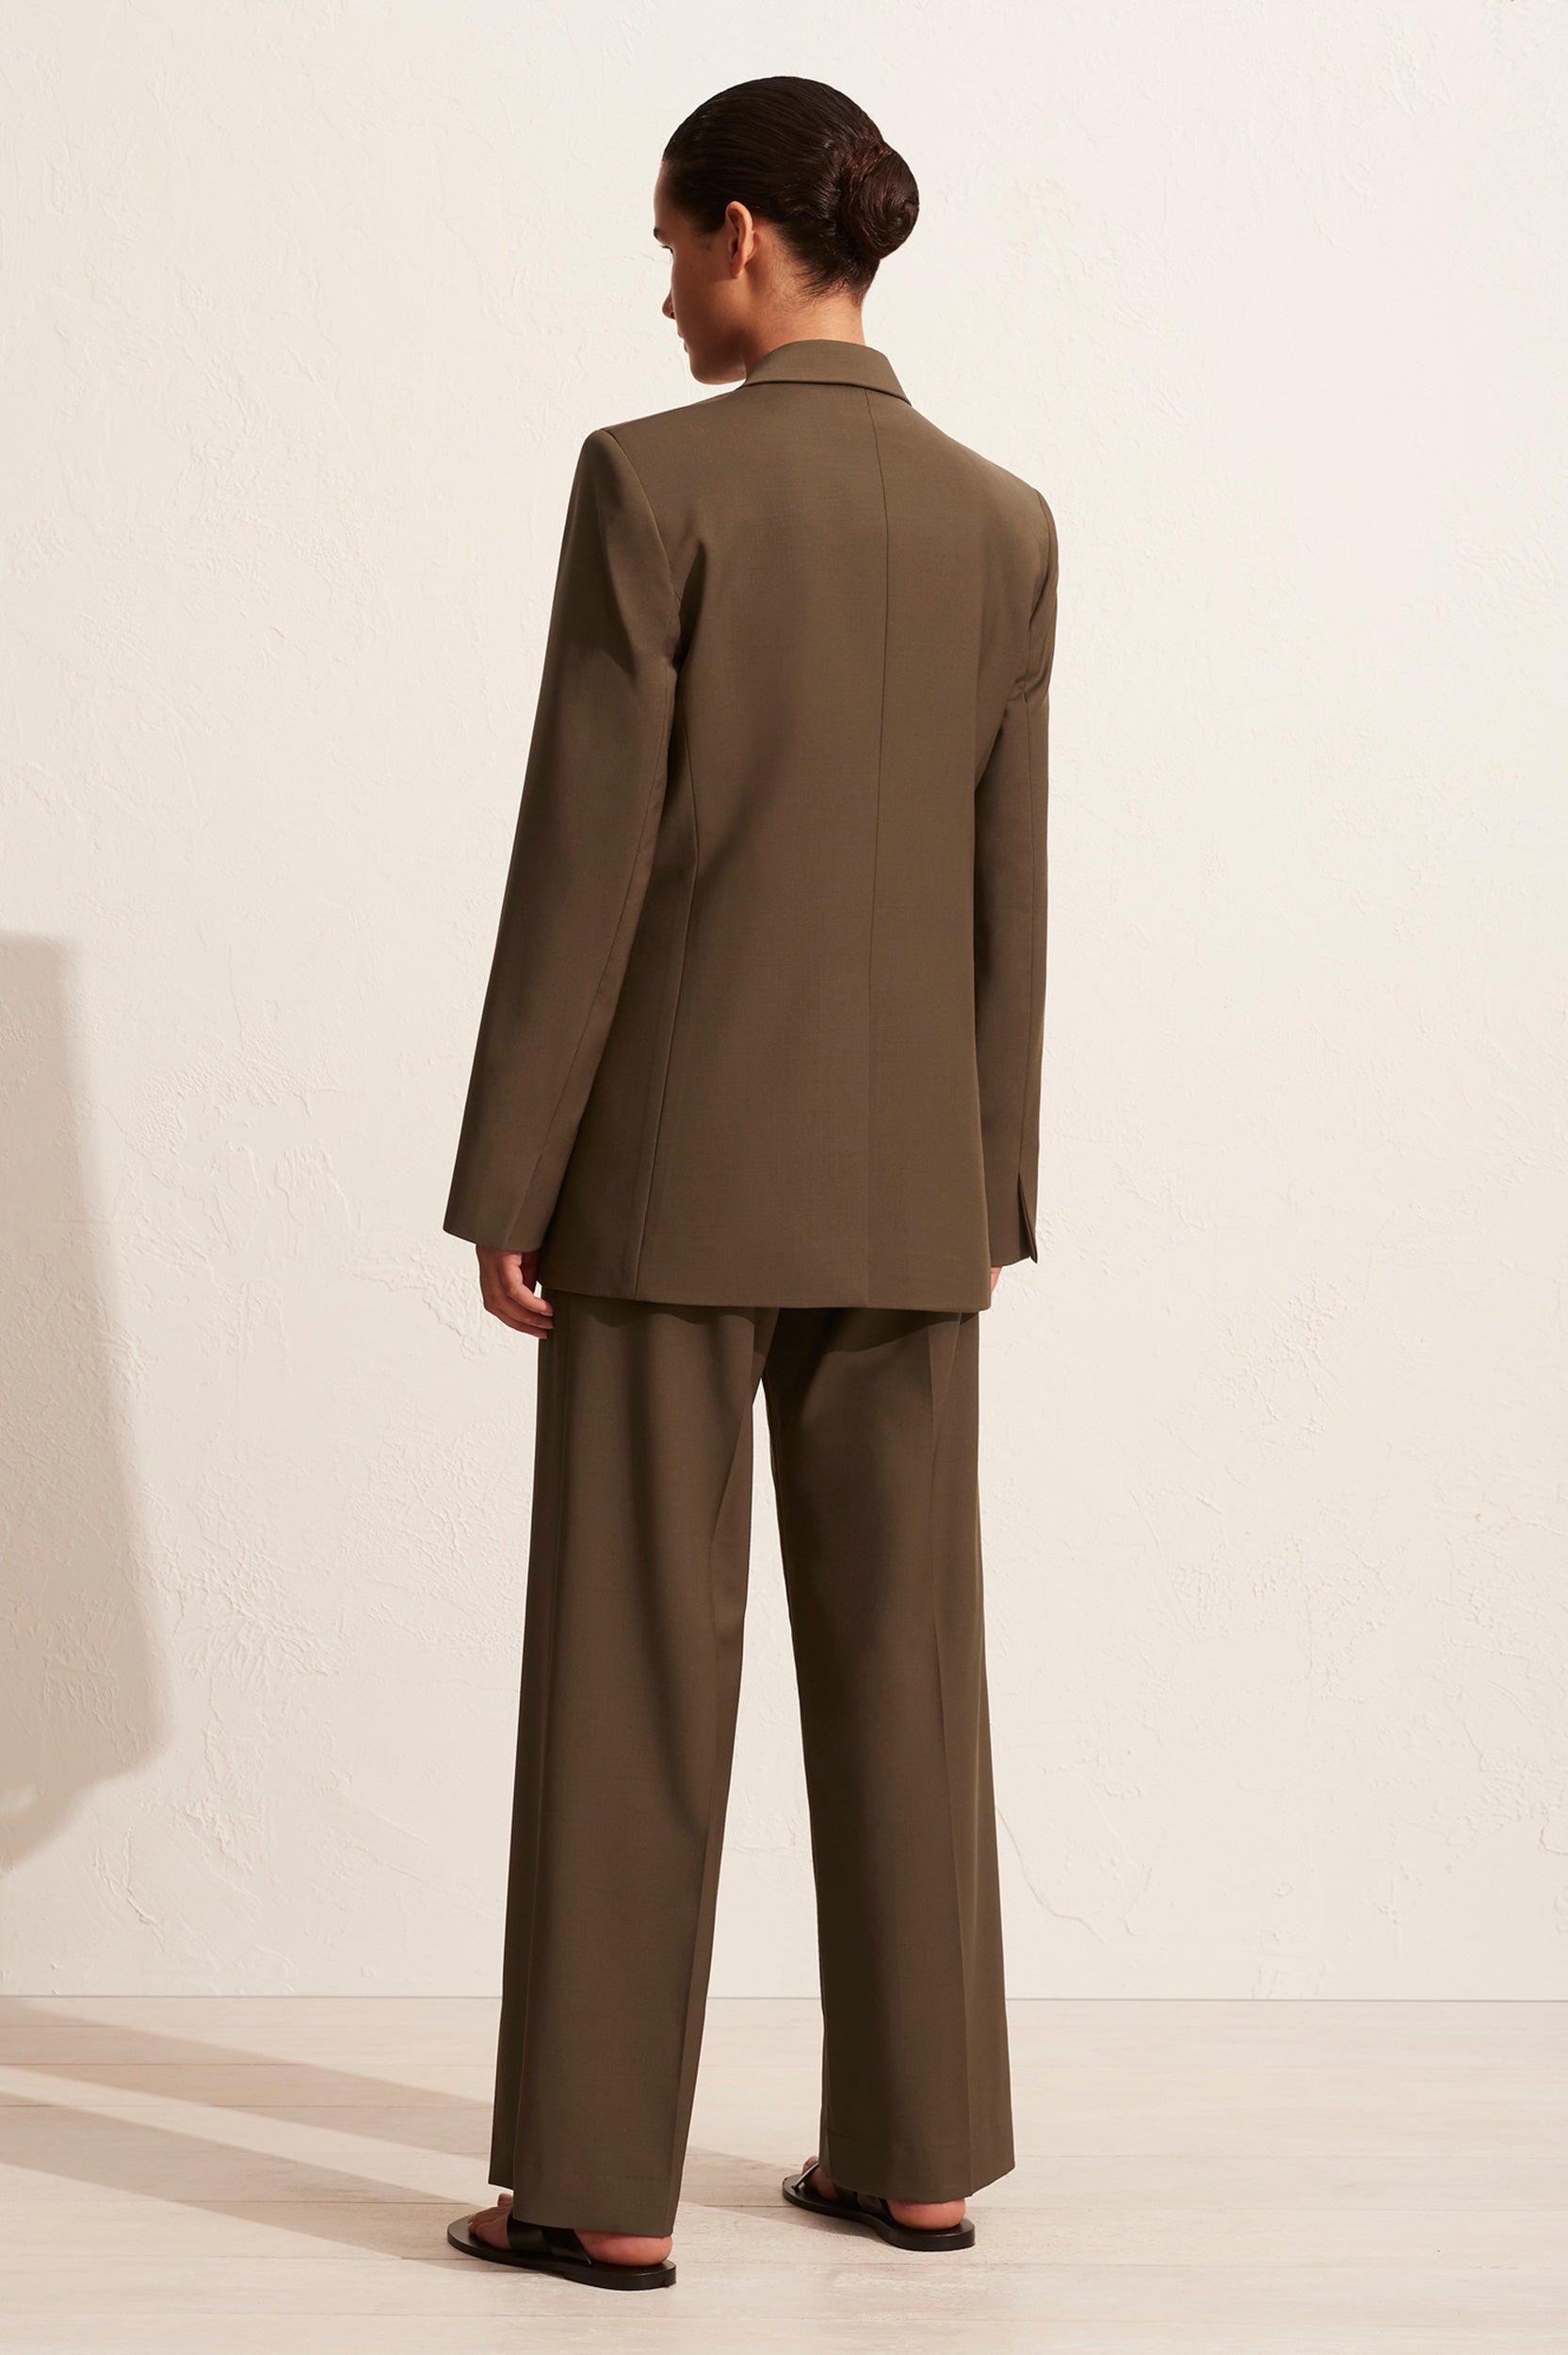 Relaxed Tailored Trouser in Coffee